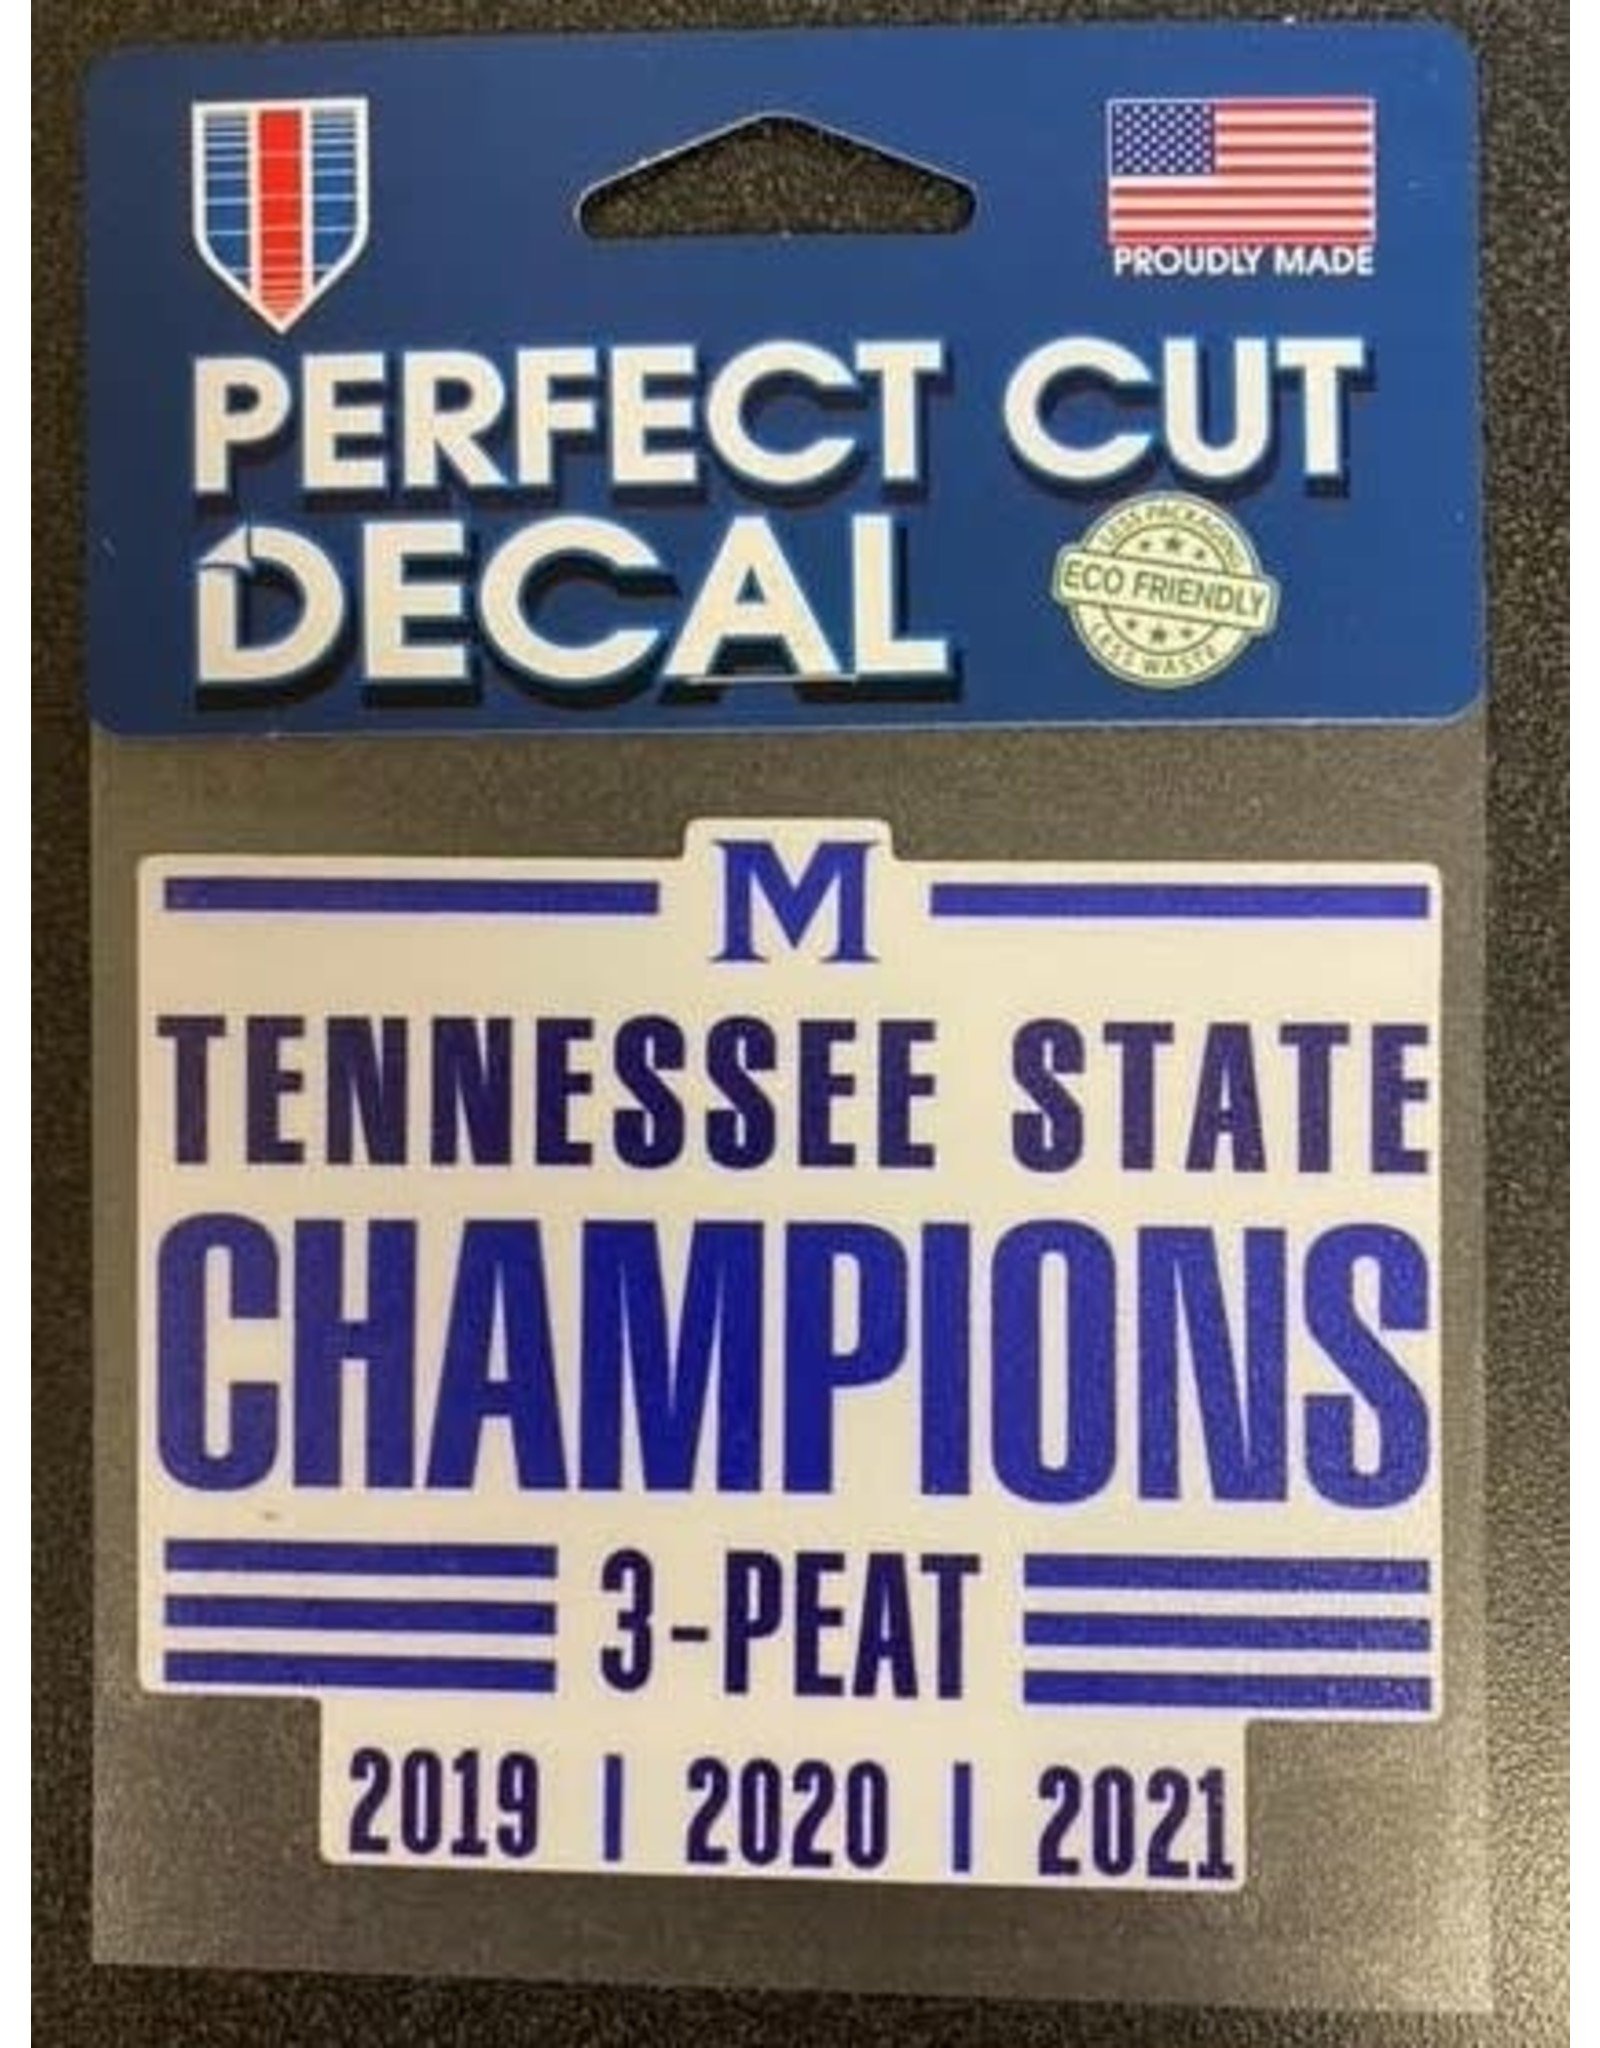 Wincraft Decal 3 Peat / Tennessee State Champions